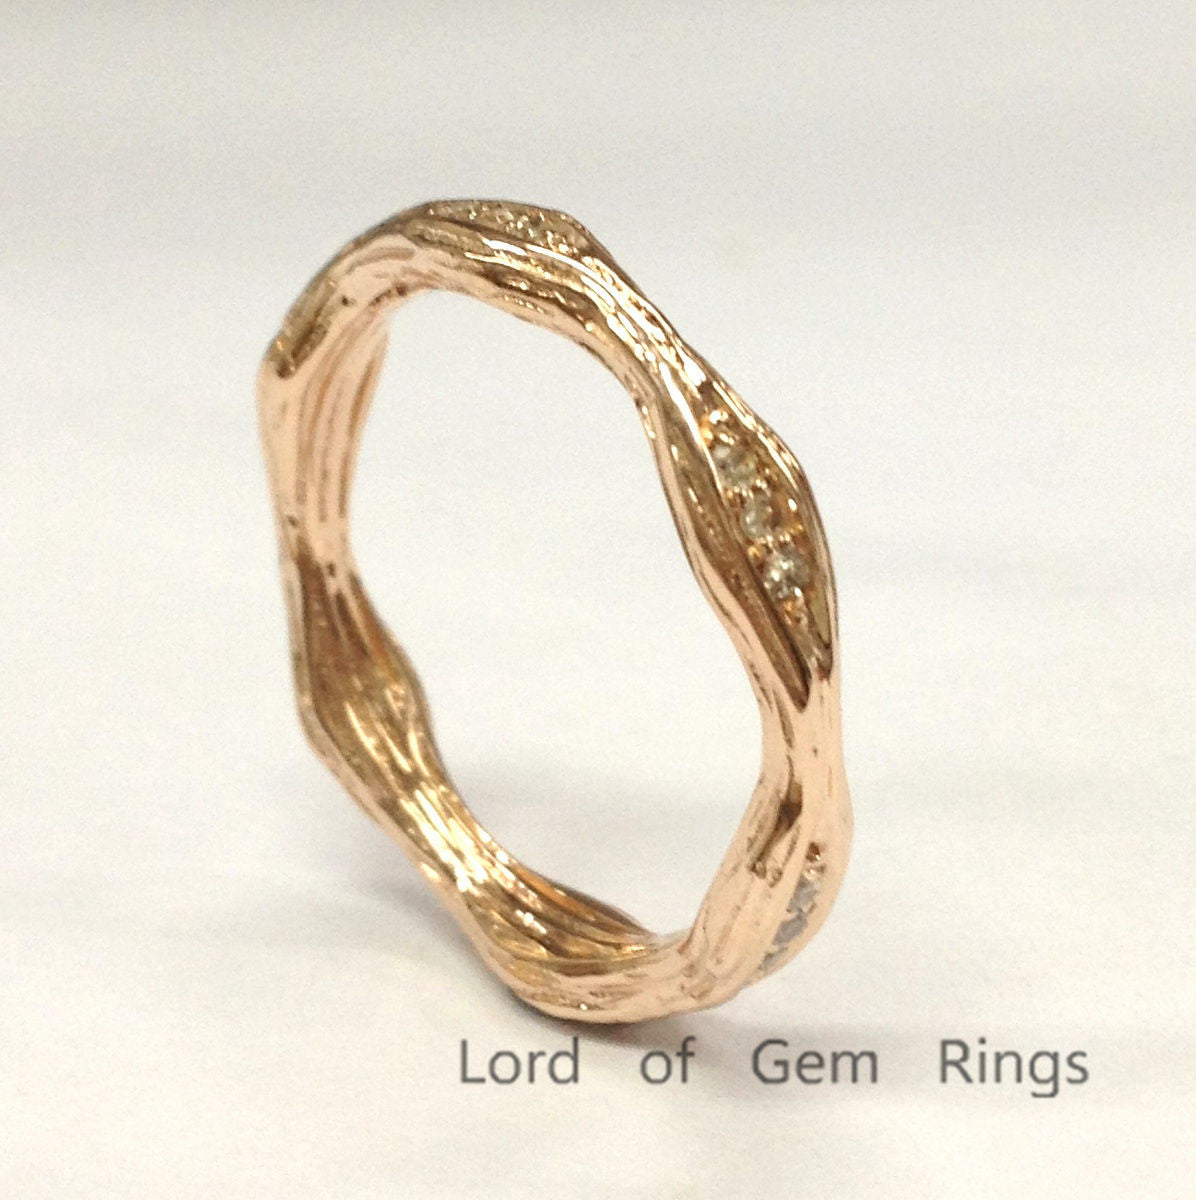 Pave Diamond Wedding Band Eternity Anniversary Ring 14K Rose Gold Art Deco Hand Crafted Twig - Lord of Gem Rings - 1